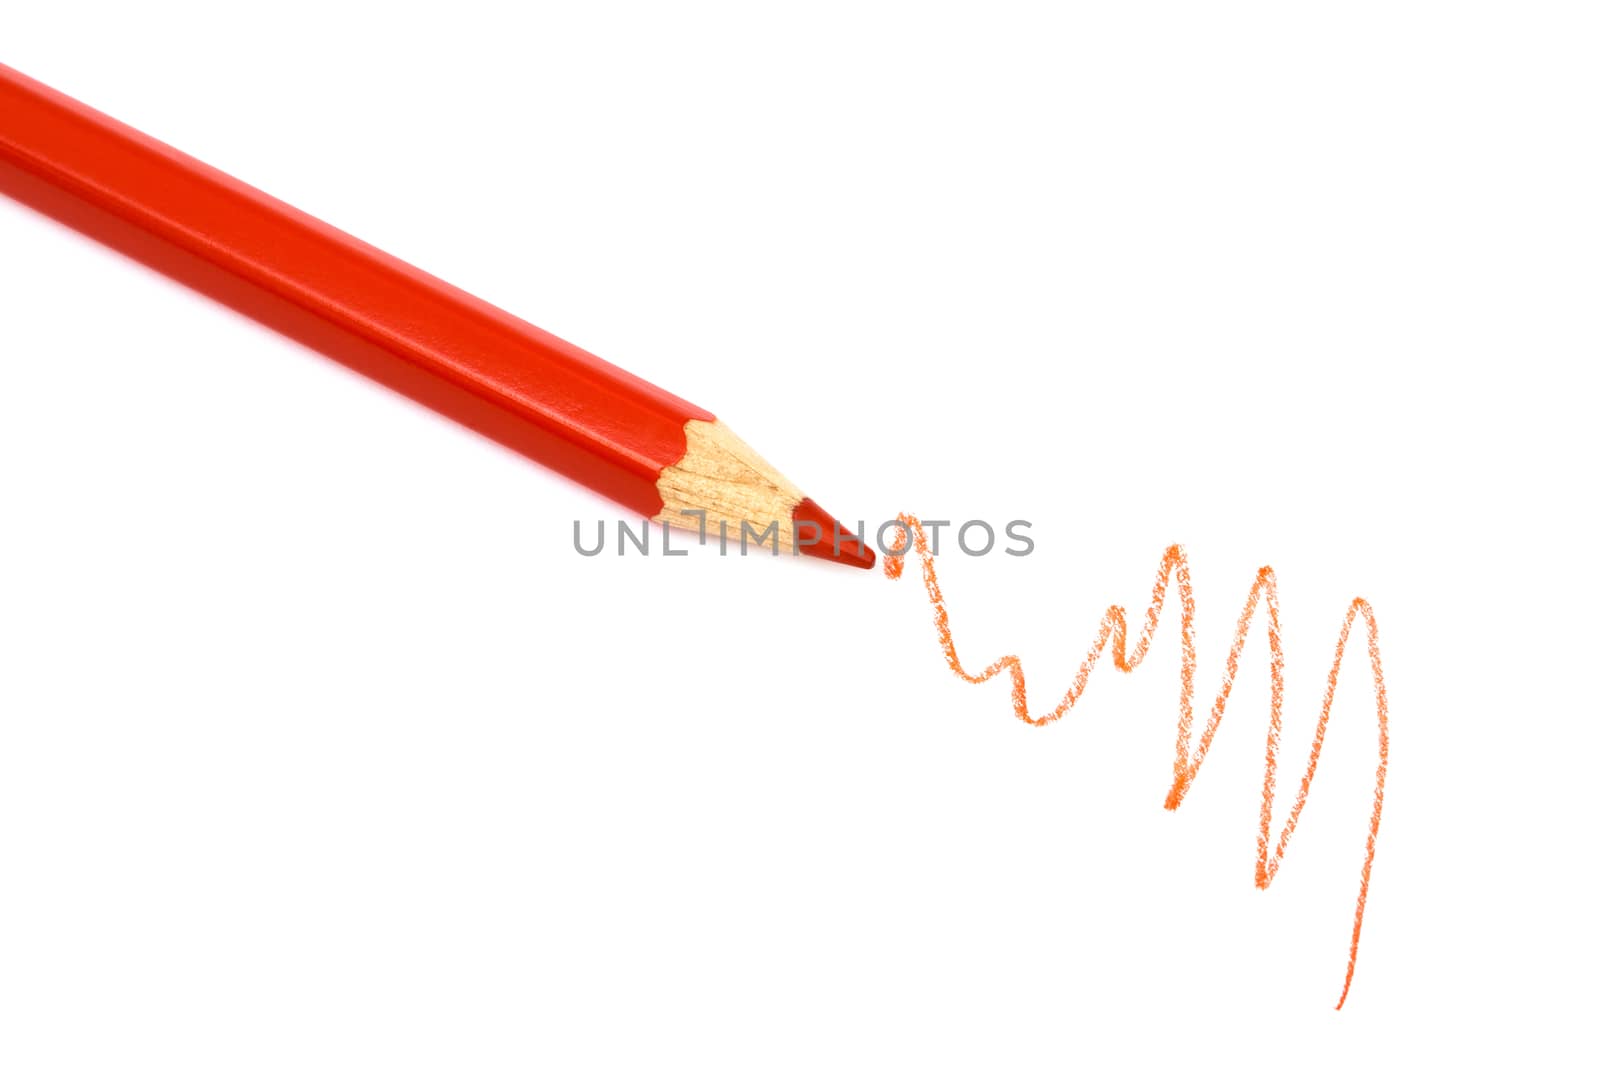 red pencil on a white background